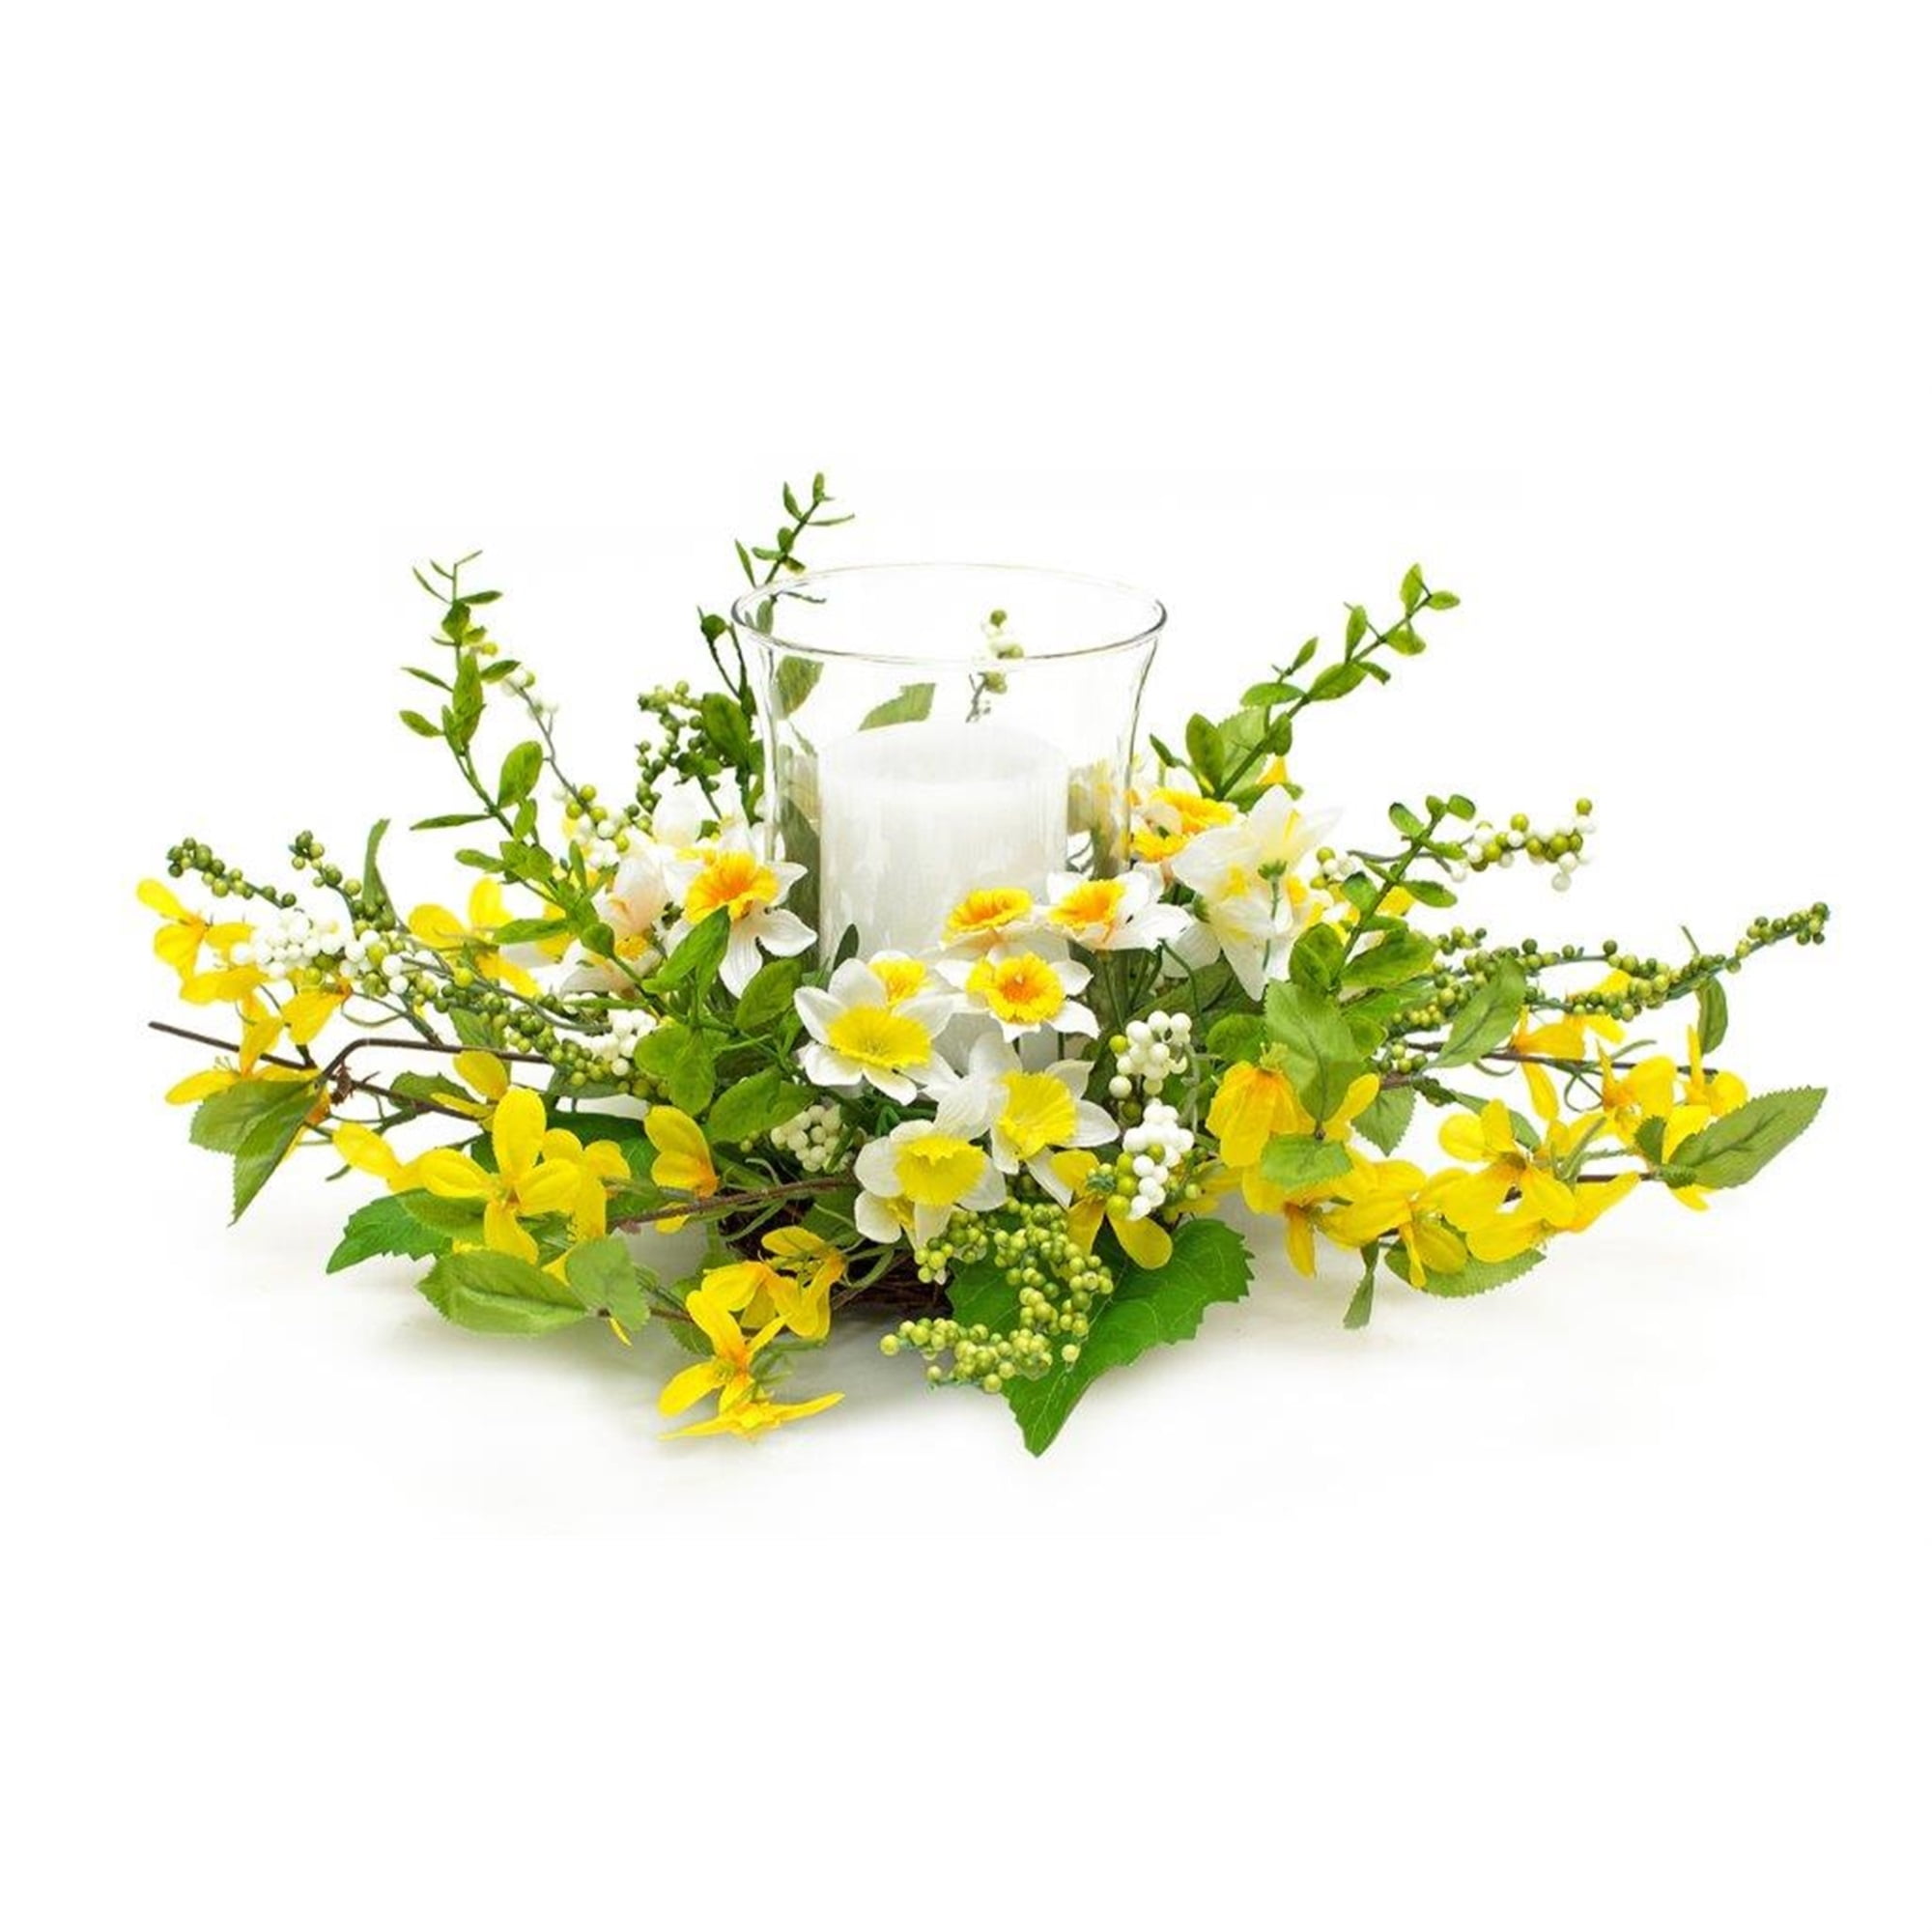 Narcissus and Forsythia Candle Holder 18"D x 8"H Polyester/Glass